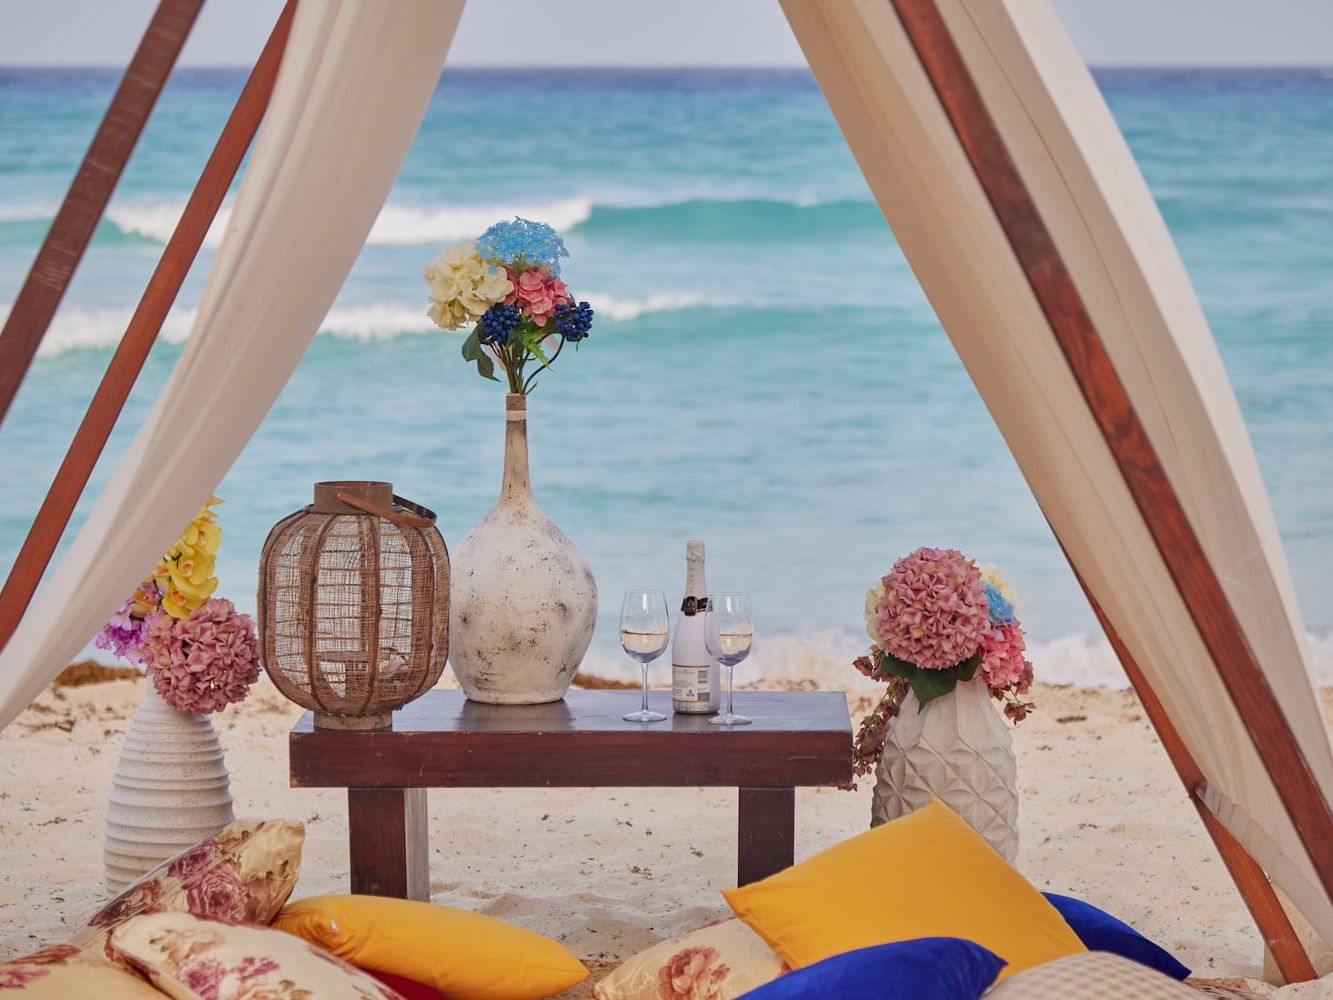 Romantic canopy by the beach at Live Aqua Resorts